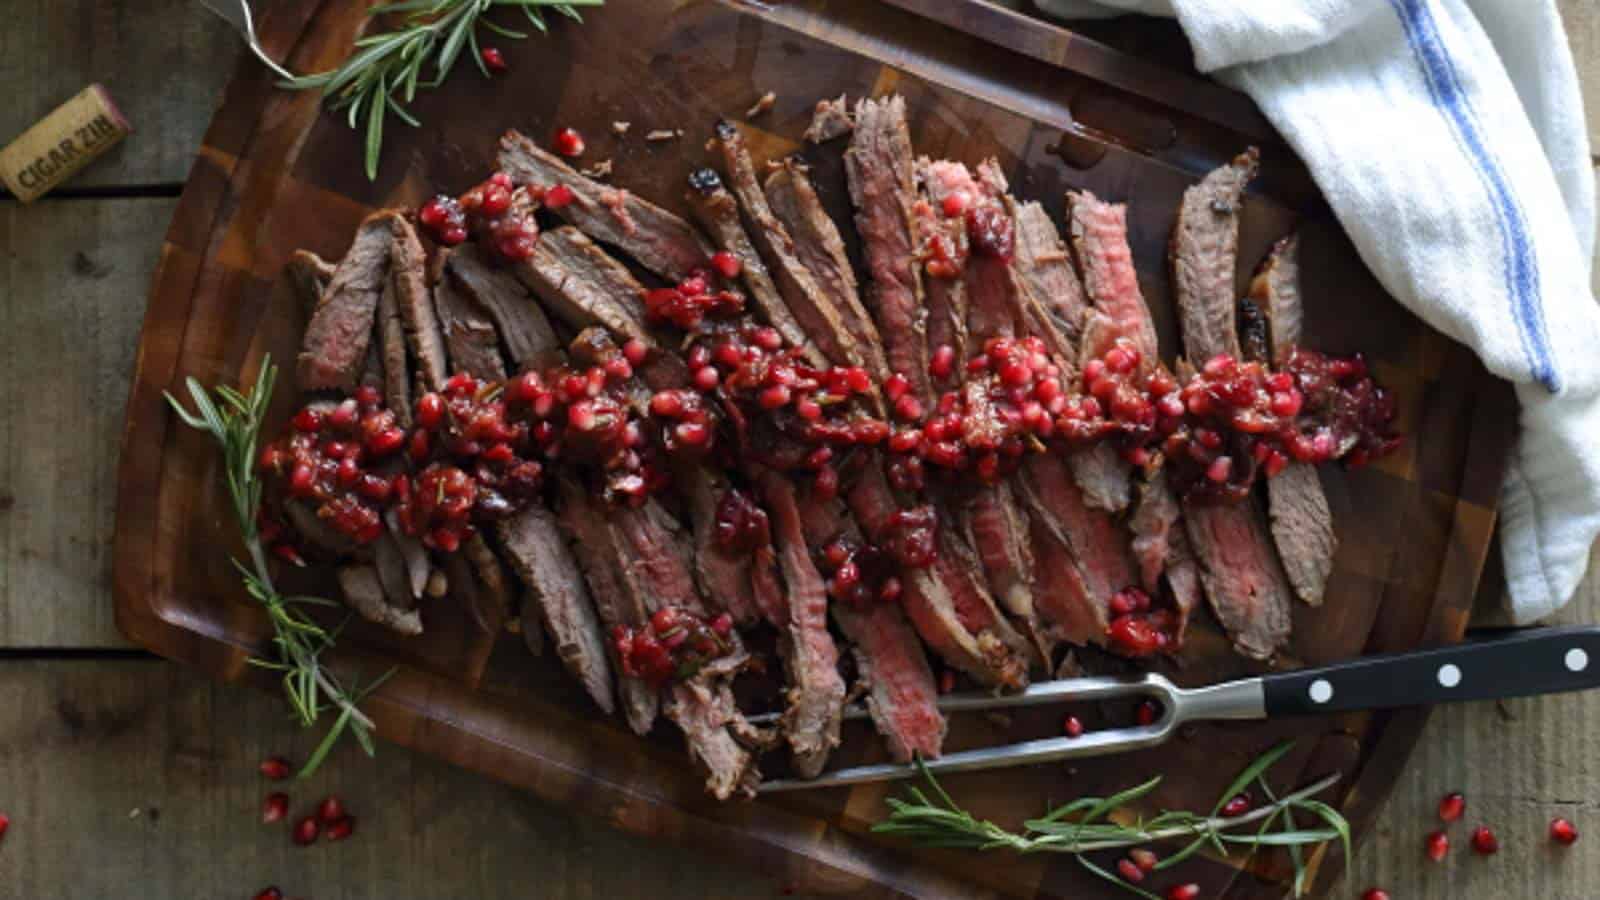 A steak with pomegranate and rosemary on a cutting board.